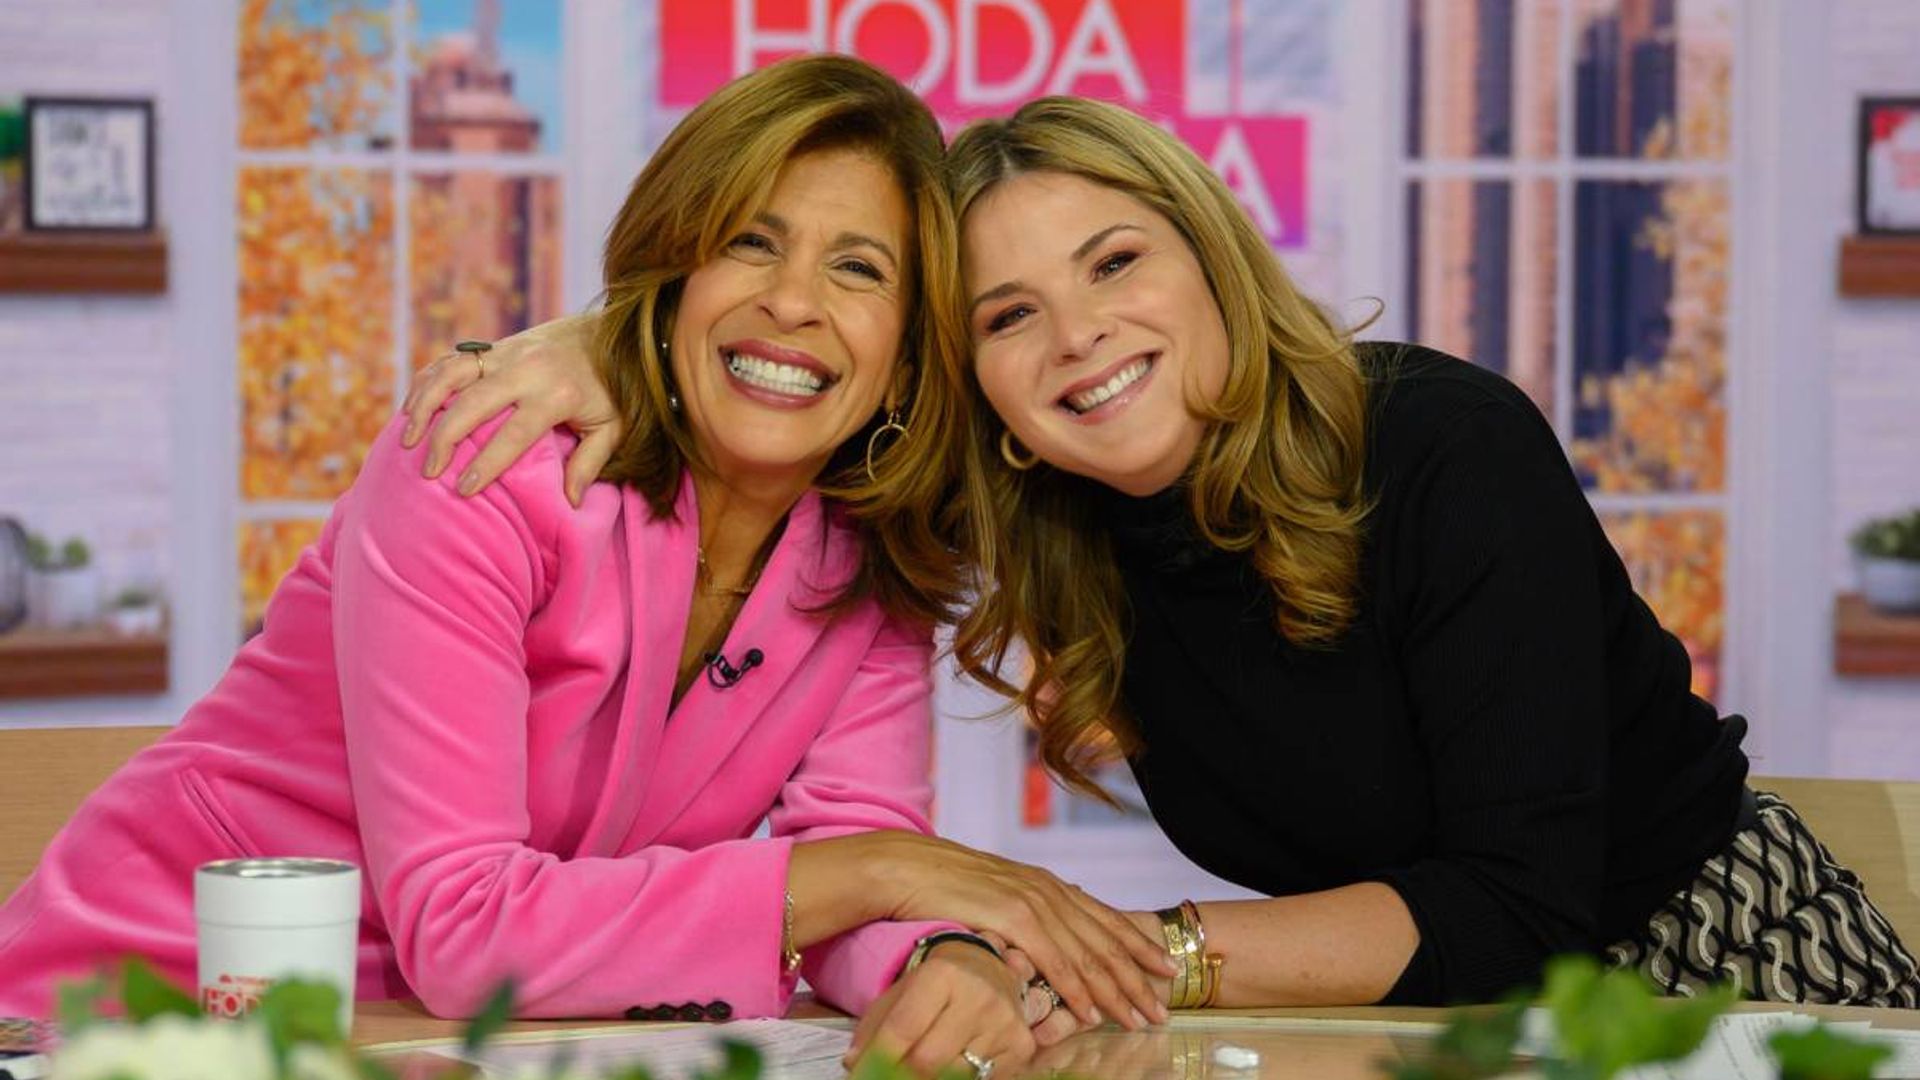 today hoda kotb replacement co star revealed